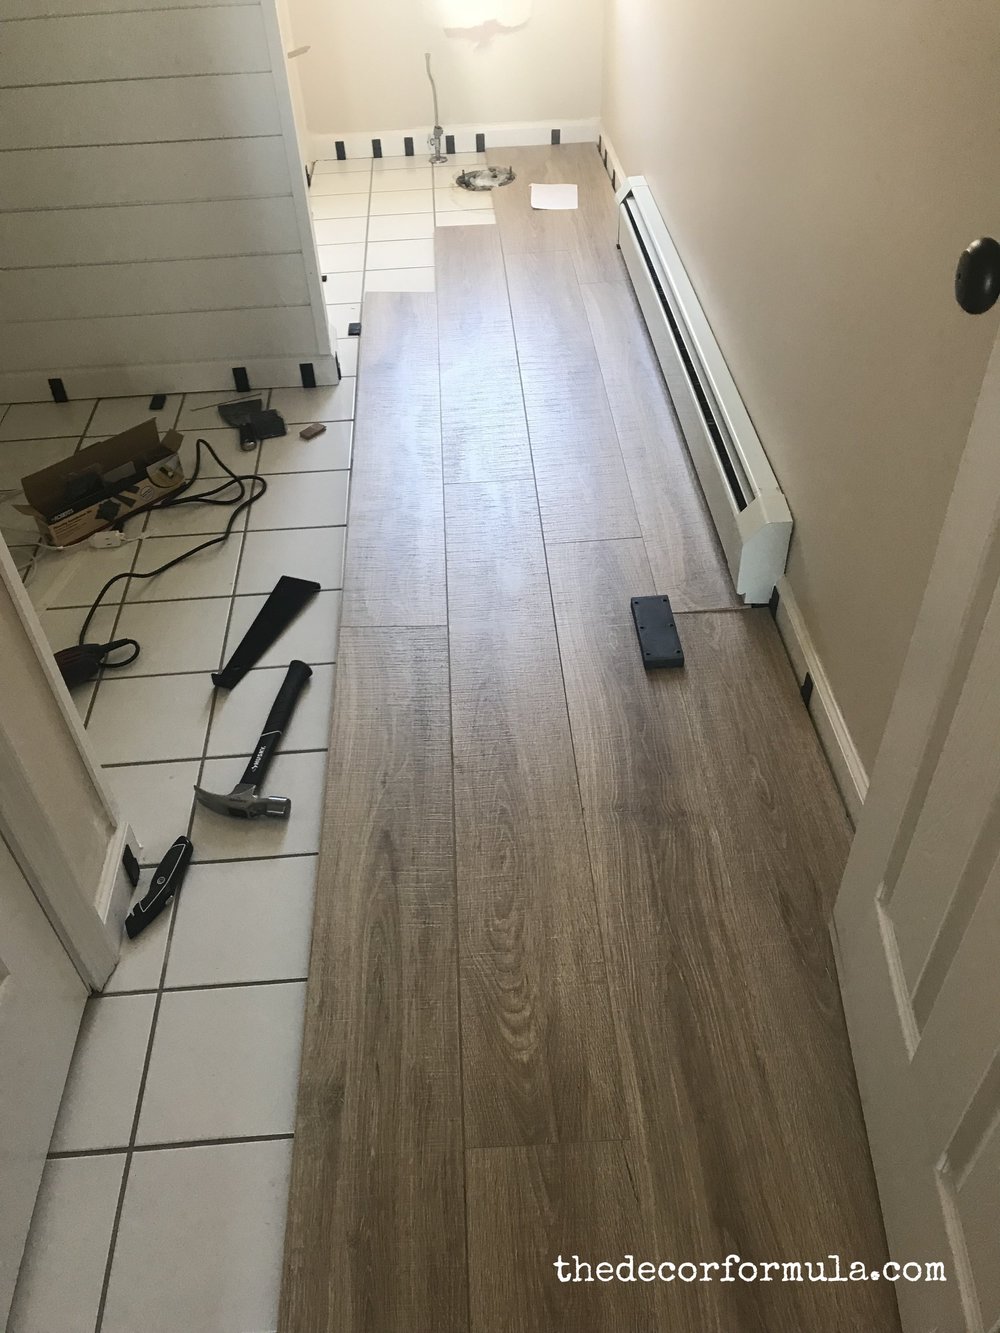 Ideas For Covering Up Tile Floors, Can You Lay Floating Floor Over Tiles